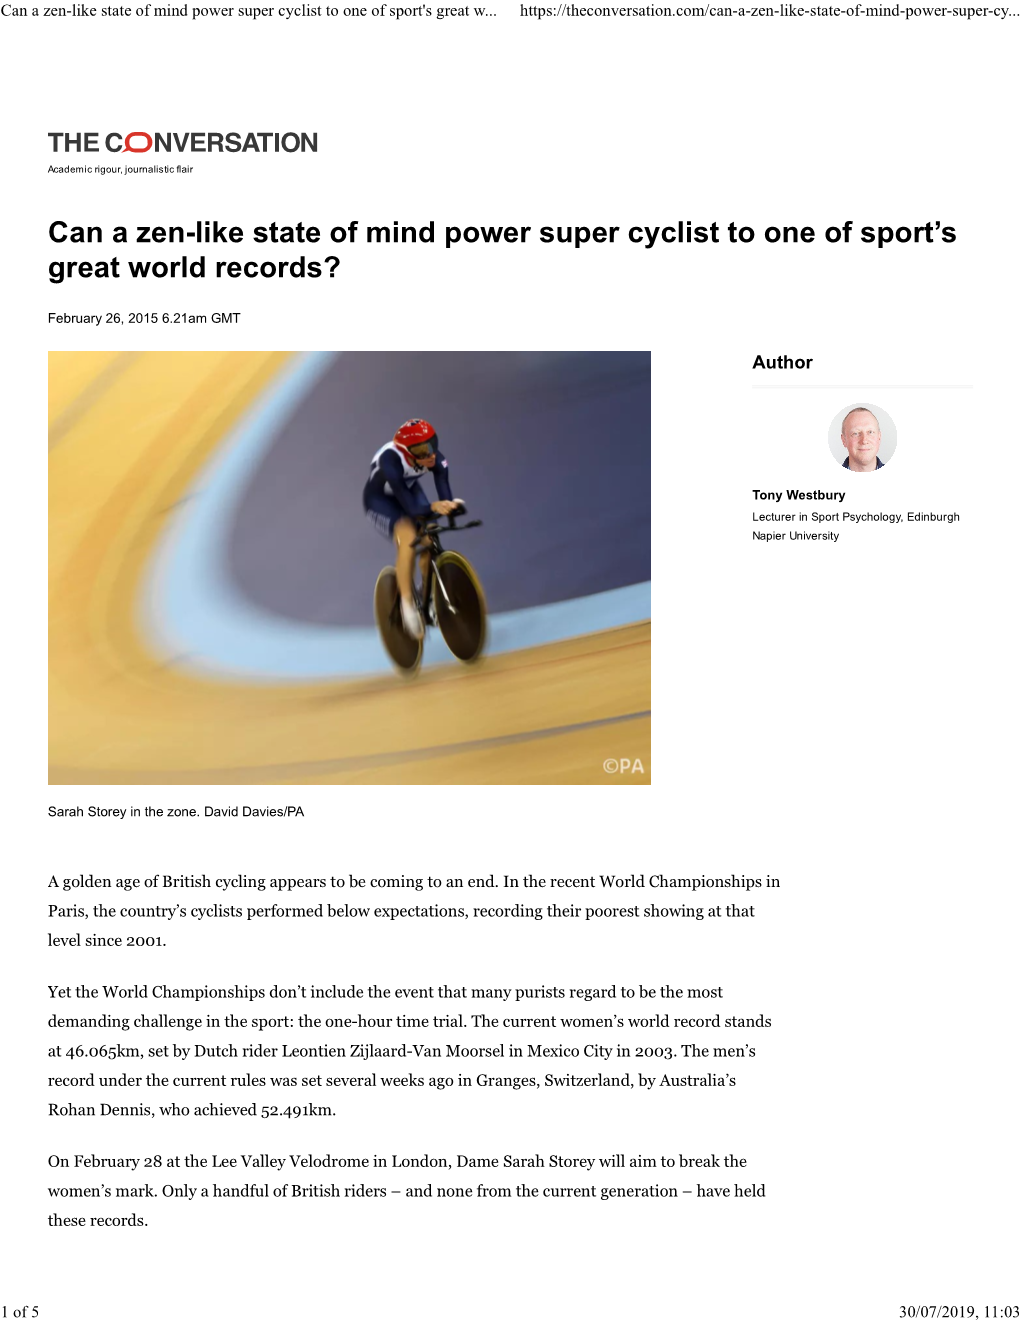 Can a Zen-Like State of Mind Power Super Cyclist to One of Sport's Great W